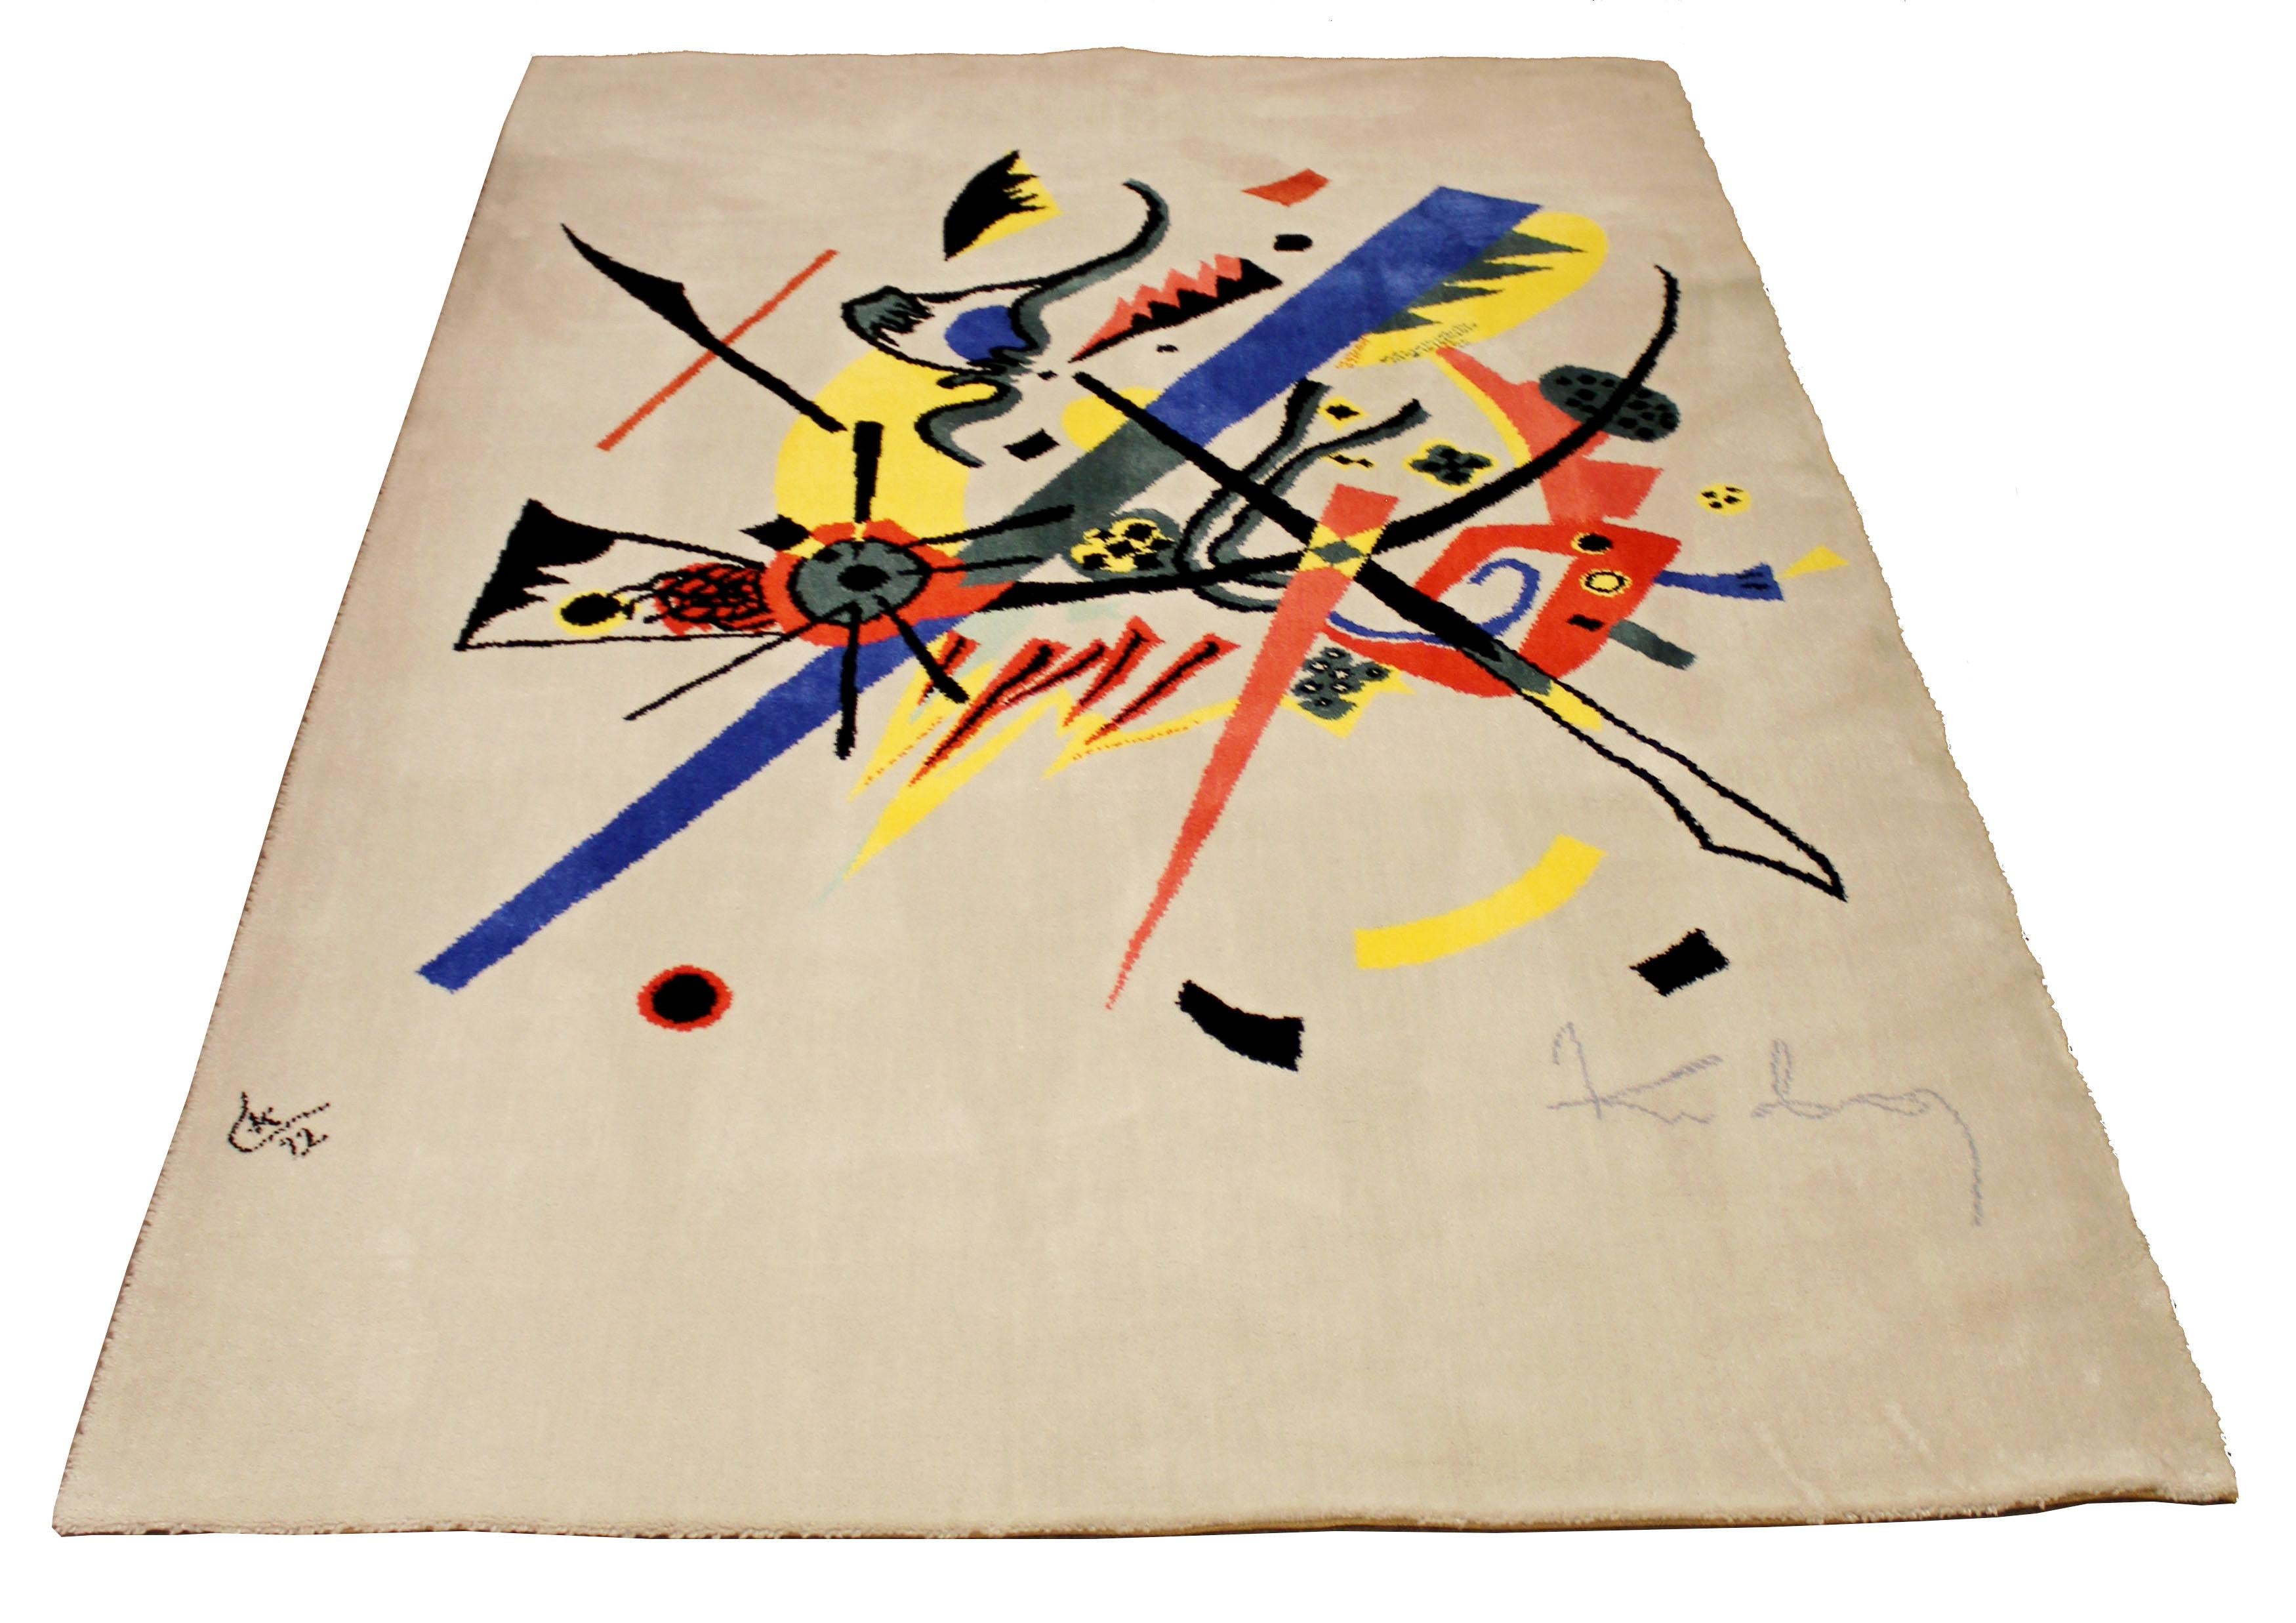 For your consideration is a magnificent, abstract art rug or wall tapestry Inspired by Kandinsky small worlds, made in Denmark by Ege axmister. In excellent condition. The dimensions are 108